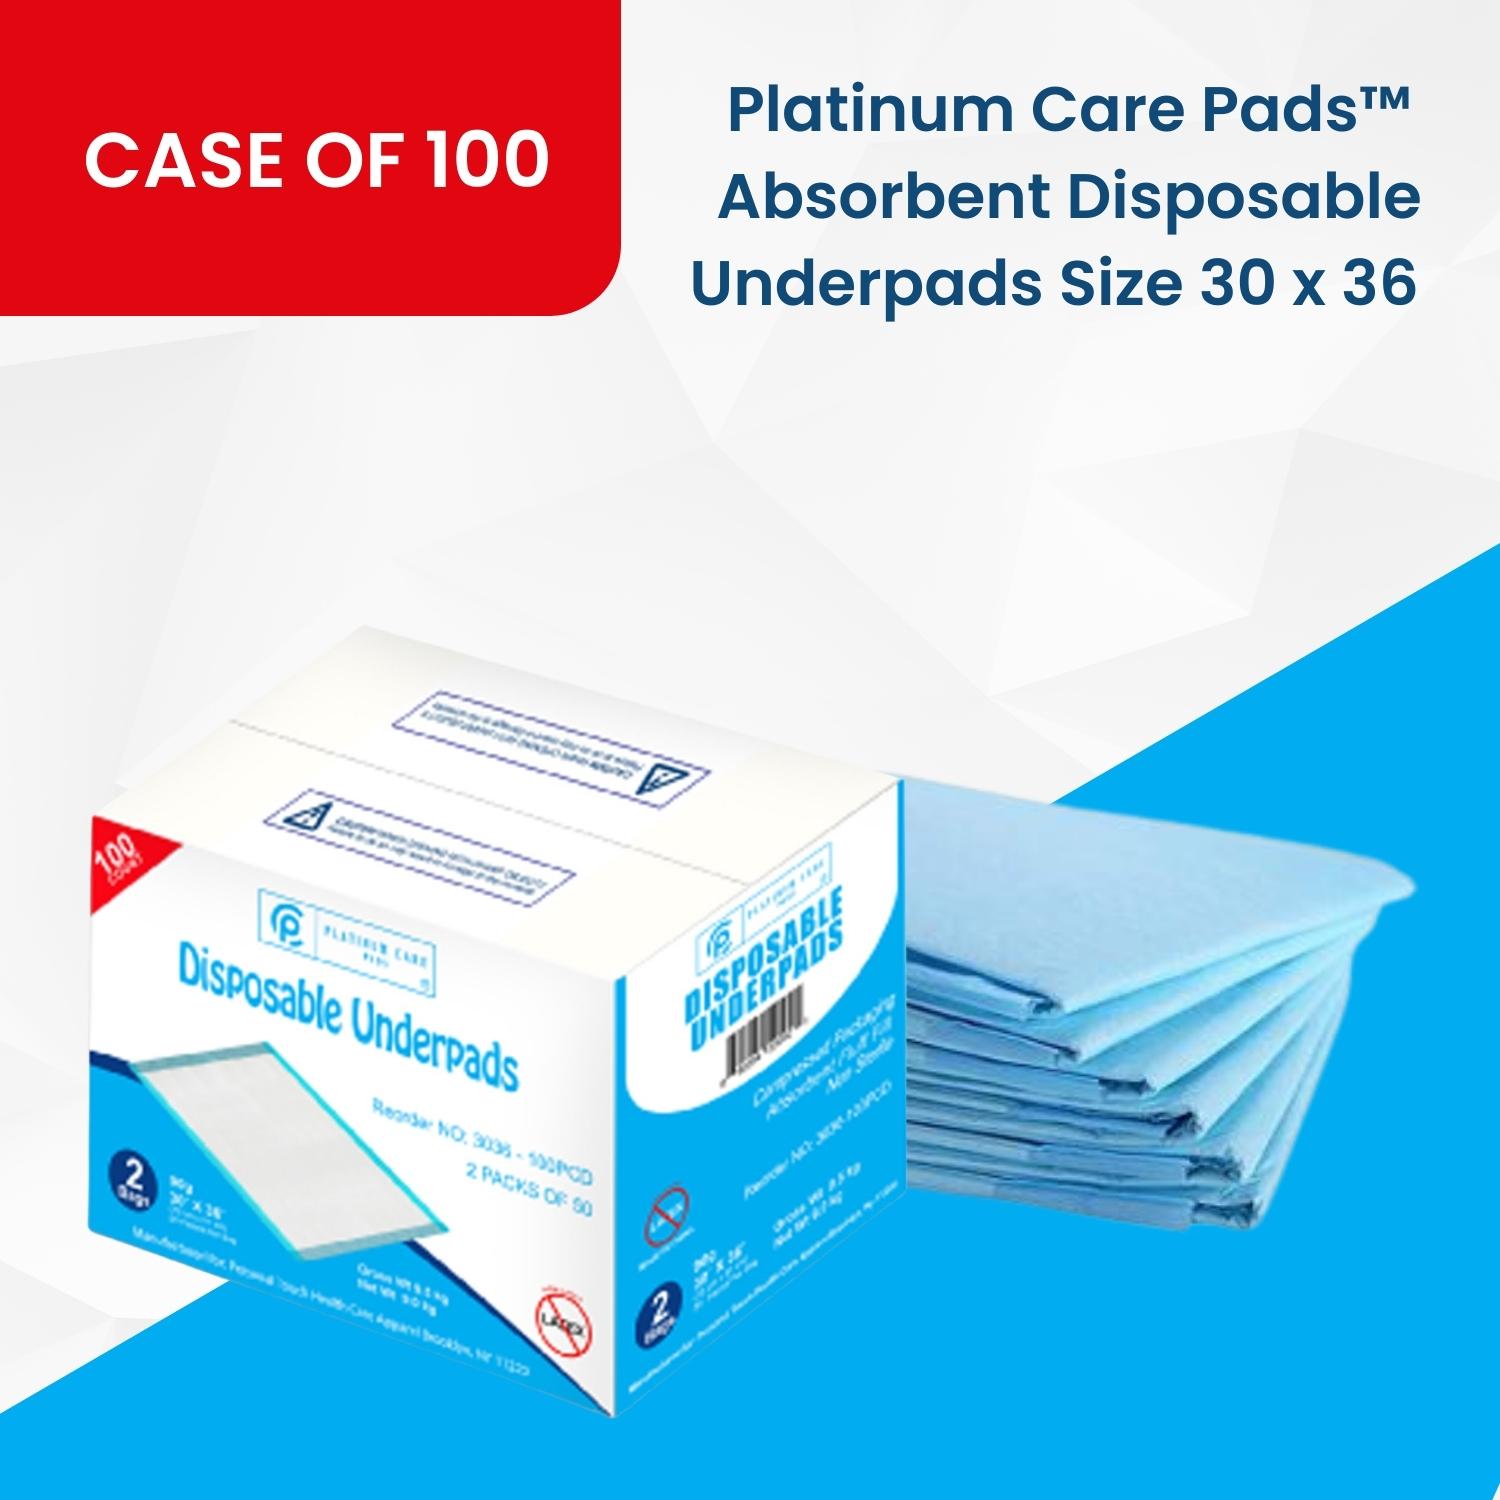 Platinum Care Pads™ Absorbent Disposable Underpads Size 30 x 36